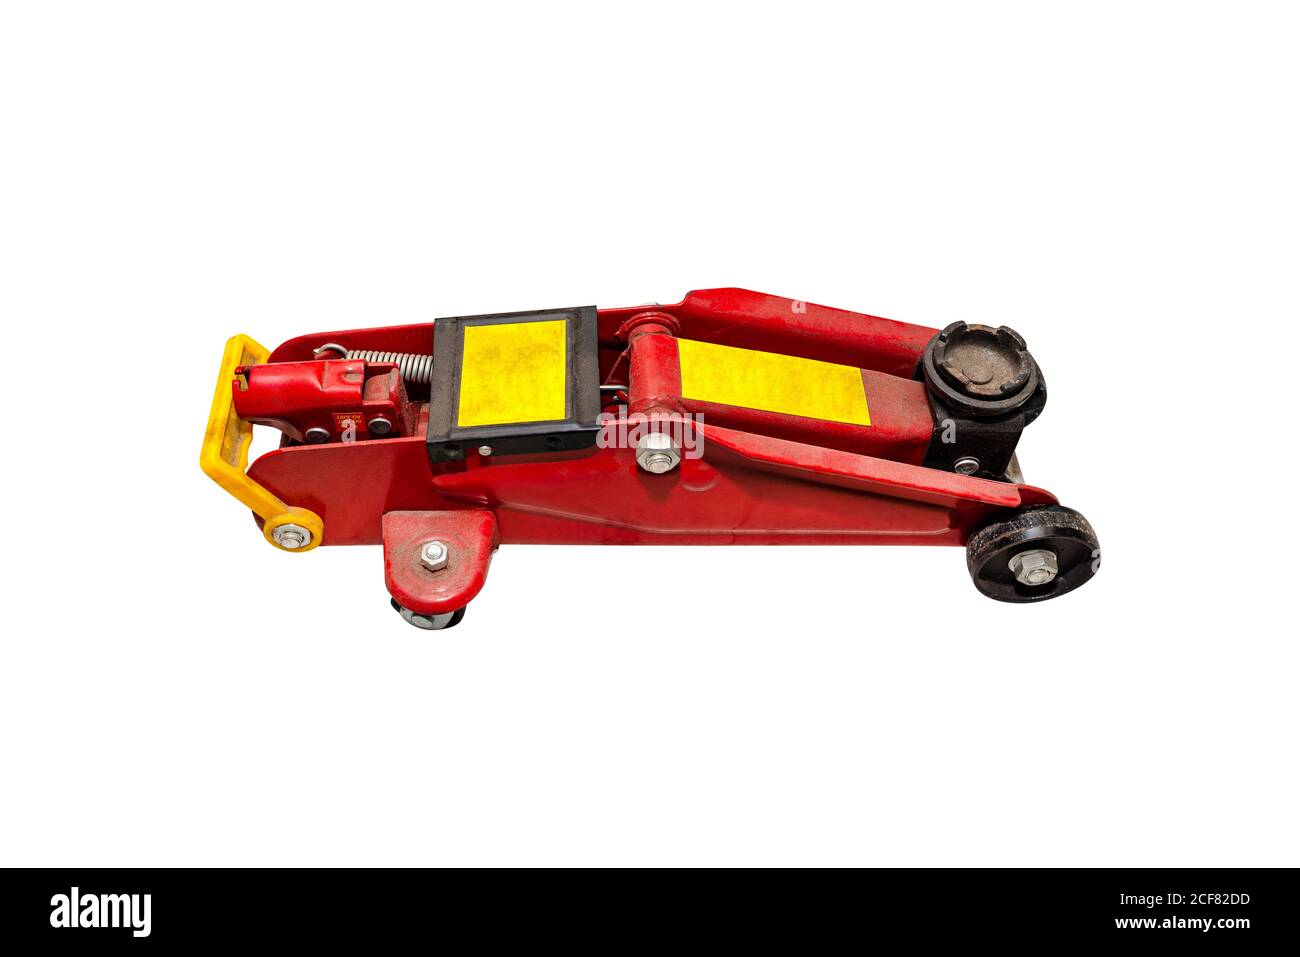 Old, red car hydraulic jack, isolated on a white background with a clipping path. Stock Photo